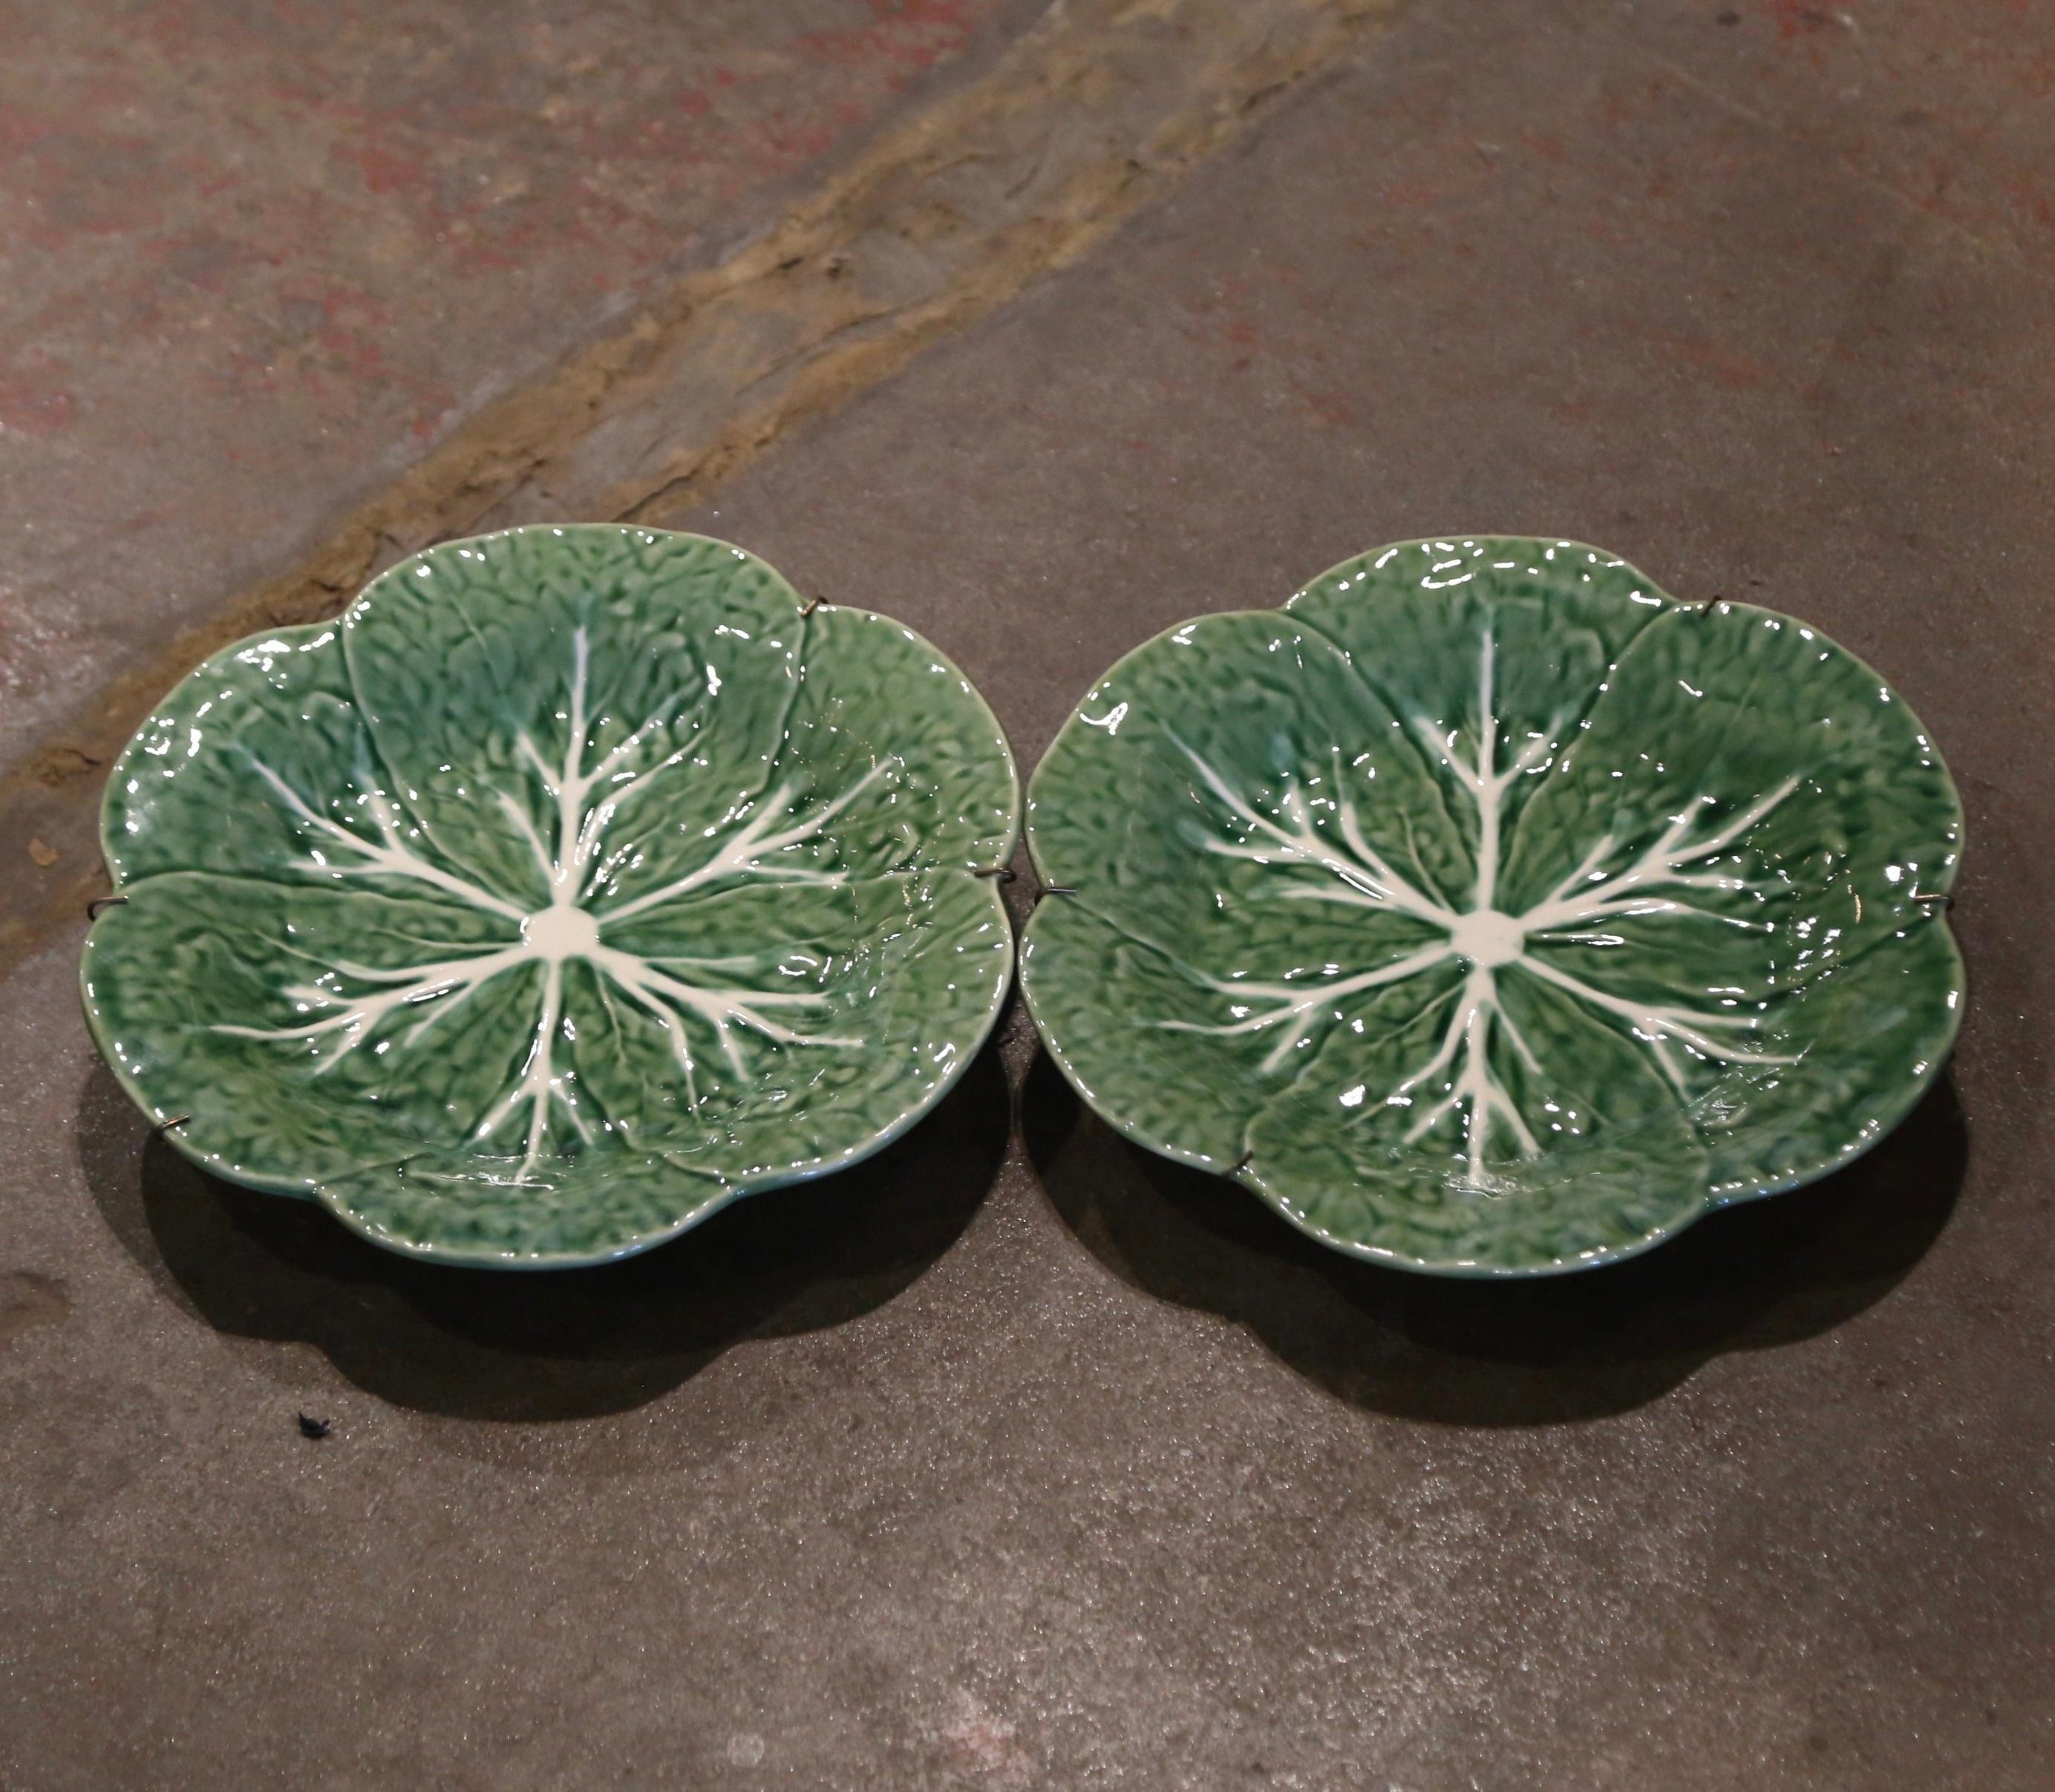 Decorate a wall or a shelf with this pair of antique wall plates. Crafted in portugal by Bordallo Pinheiro, each plate with scalloped rim features a cabbage form center in the green and beige palette. Both pieces are in excellent condition with rich